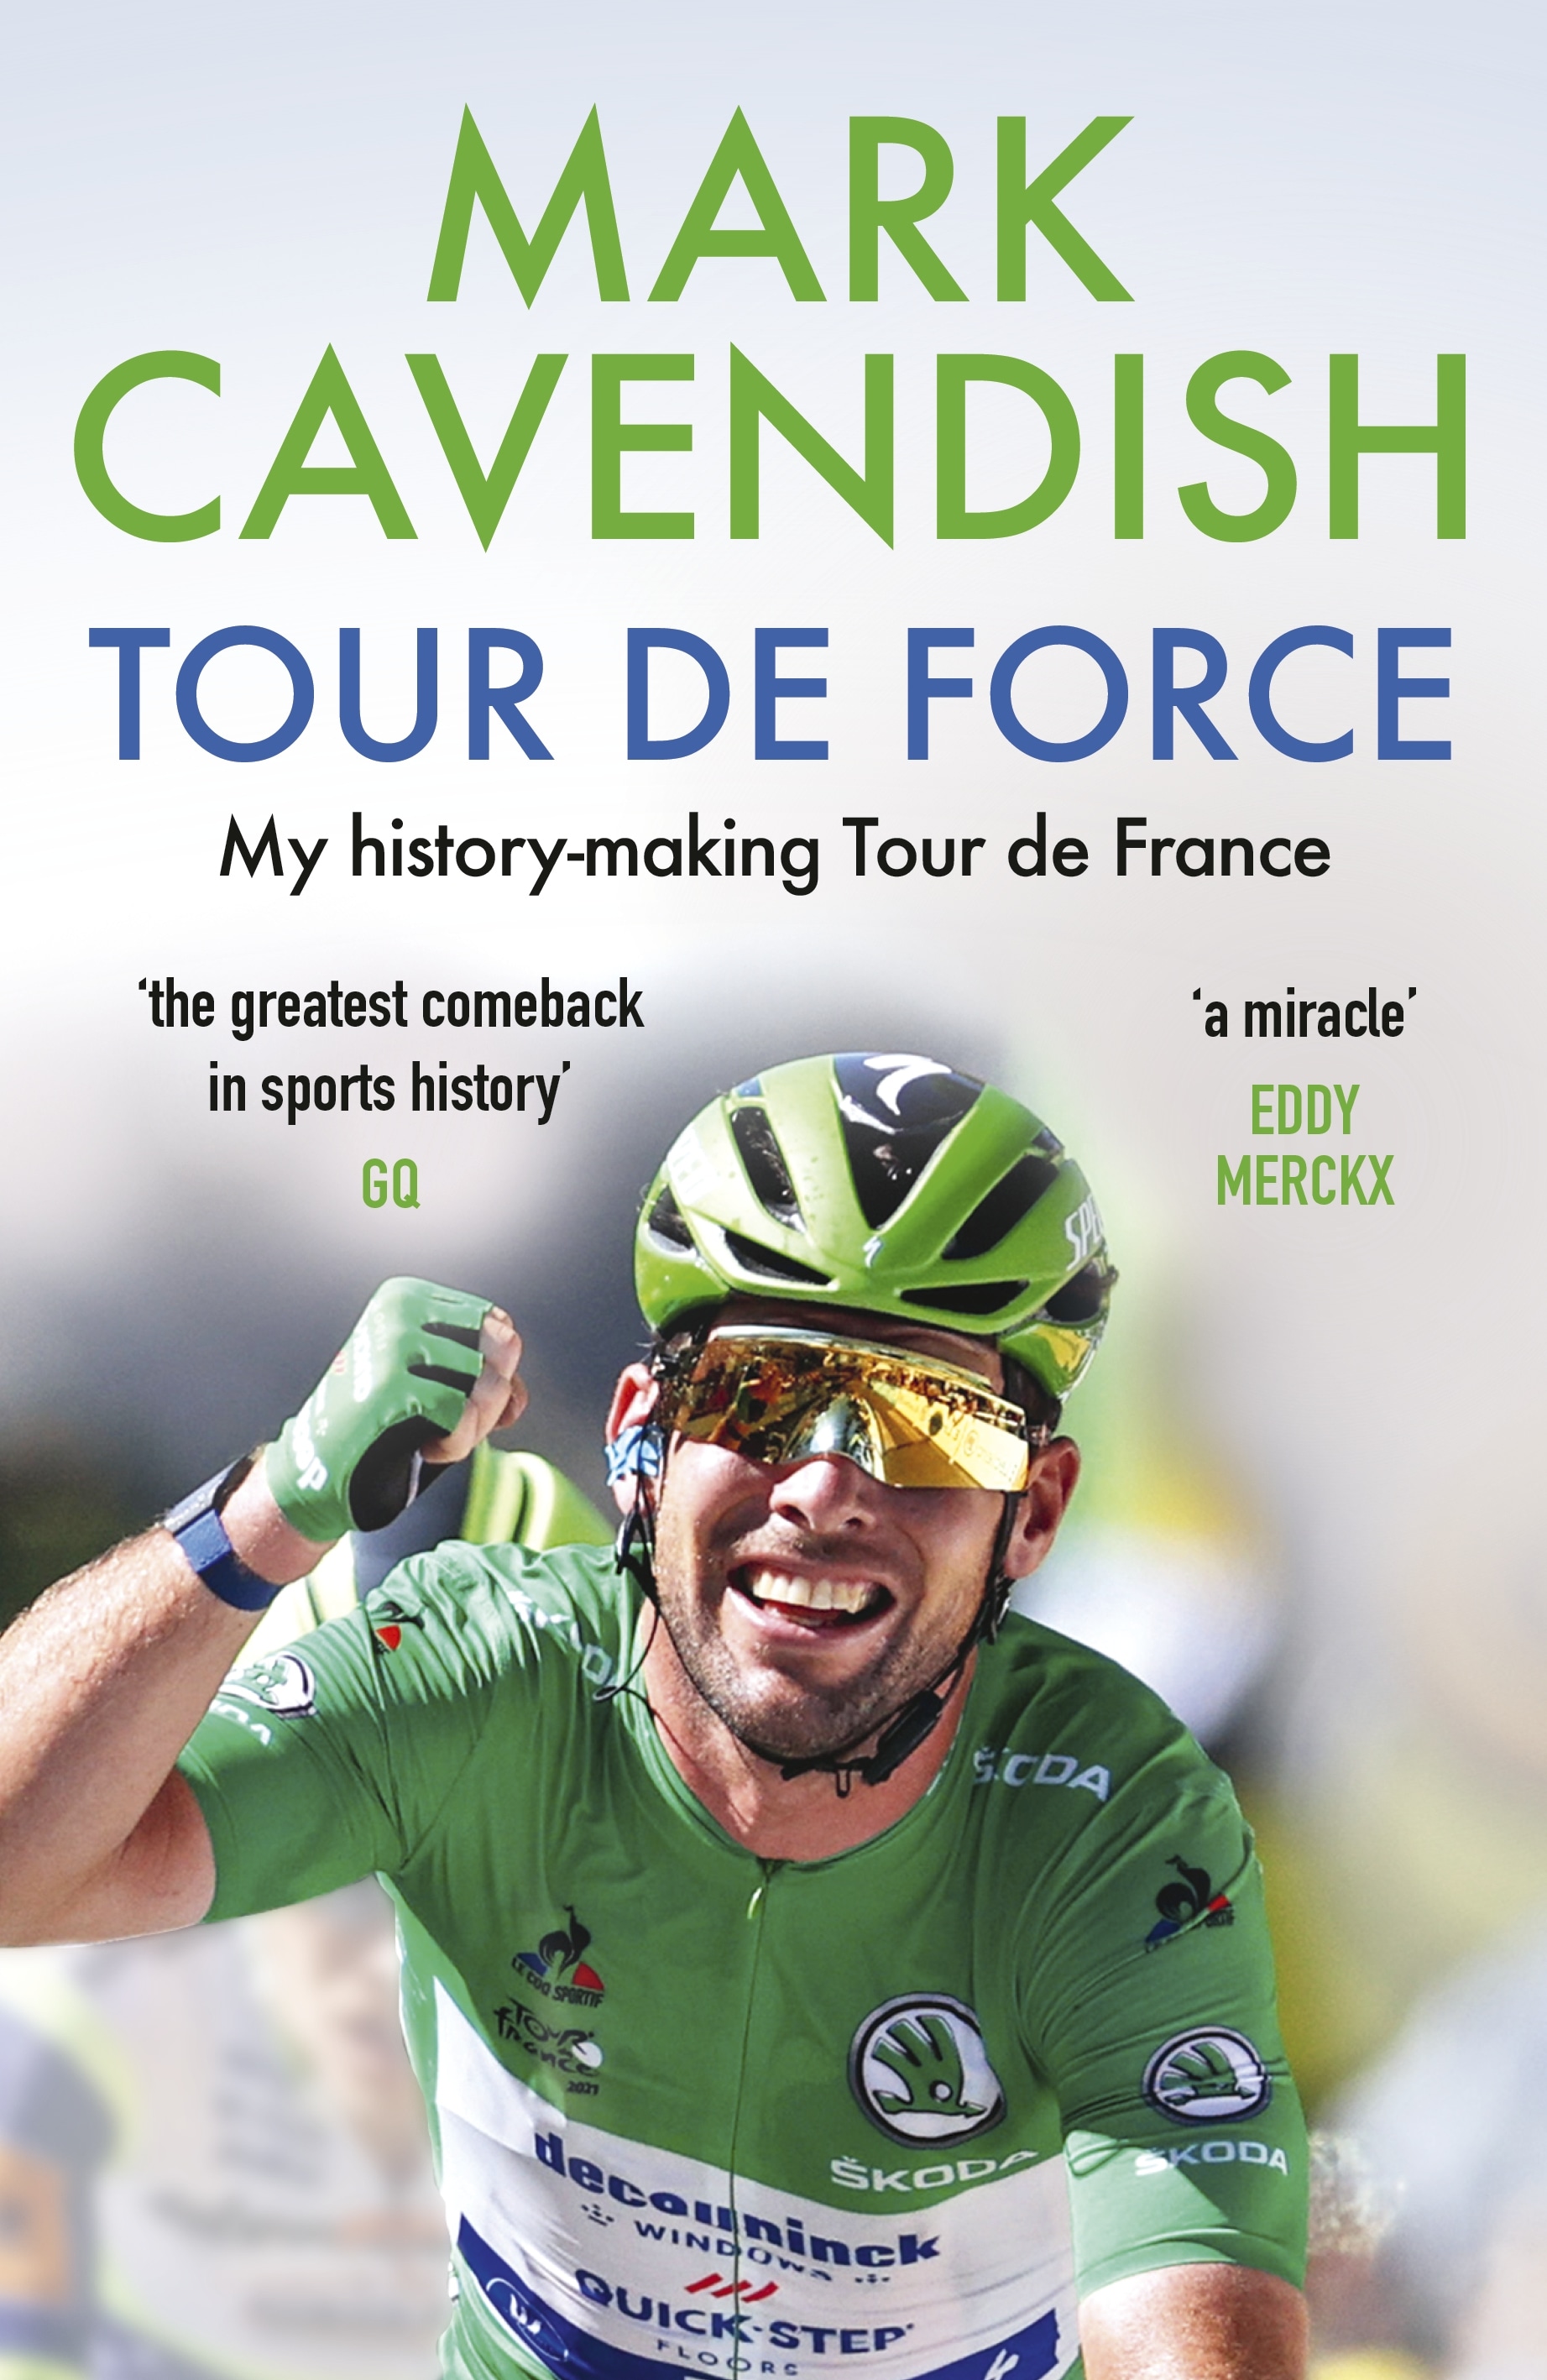 Book “Tour de Force” by Mark Cavendish — May 26, 2022